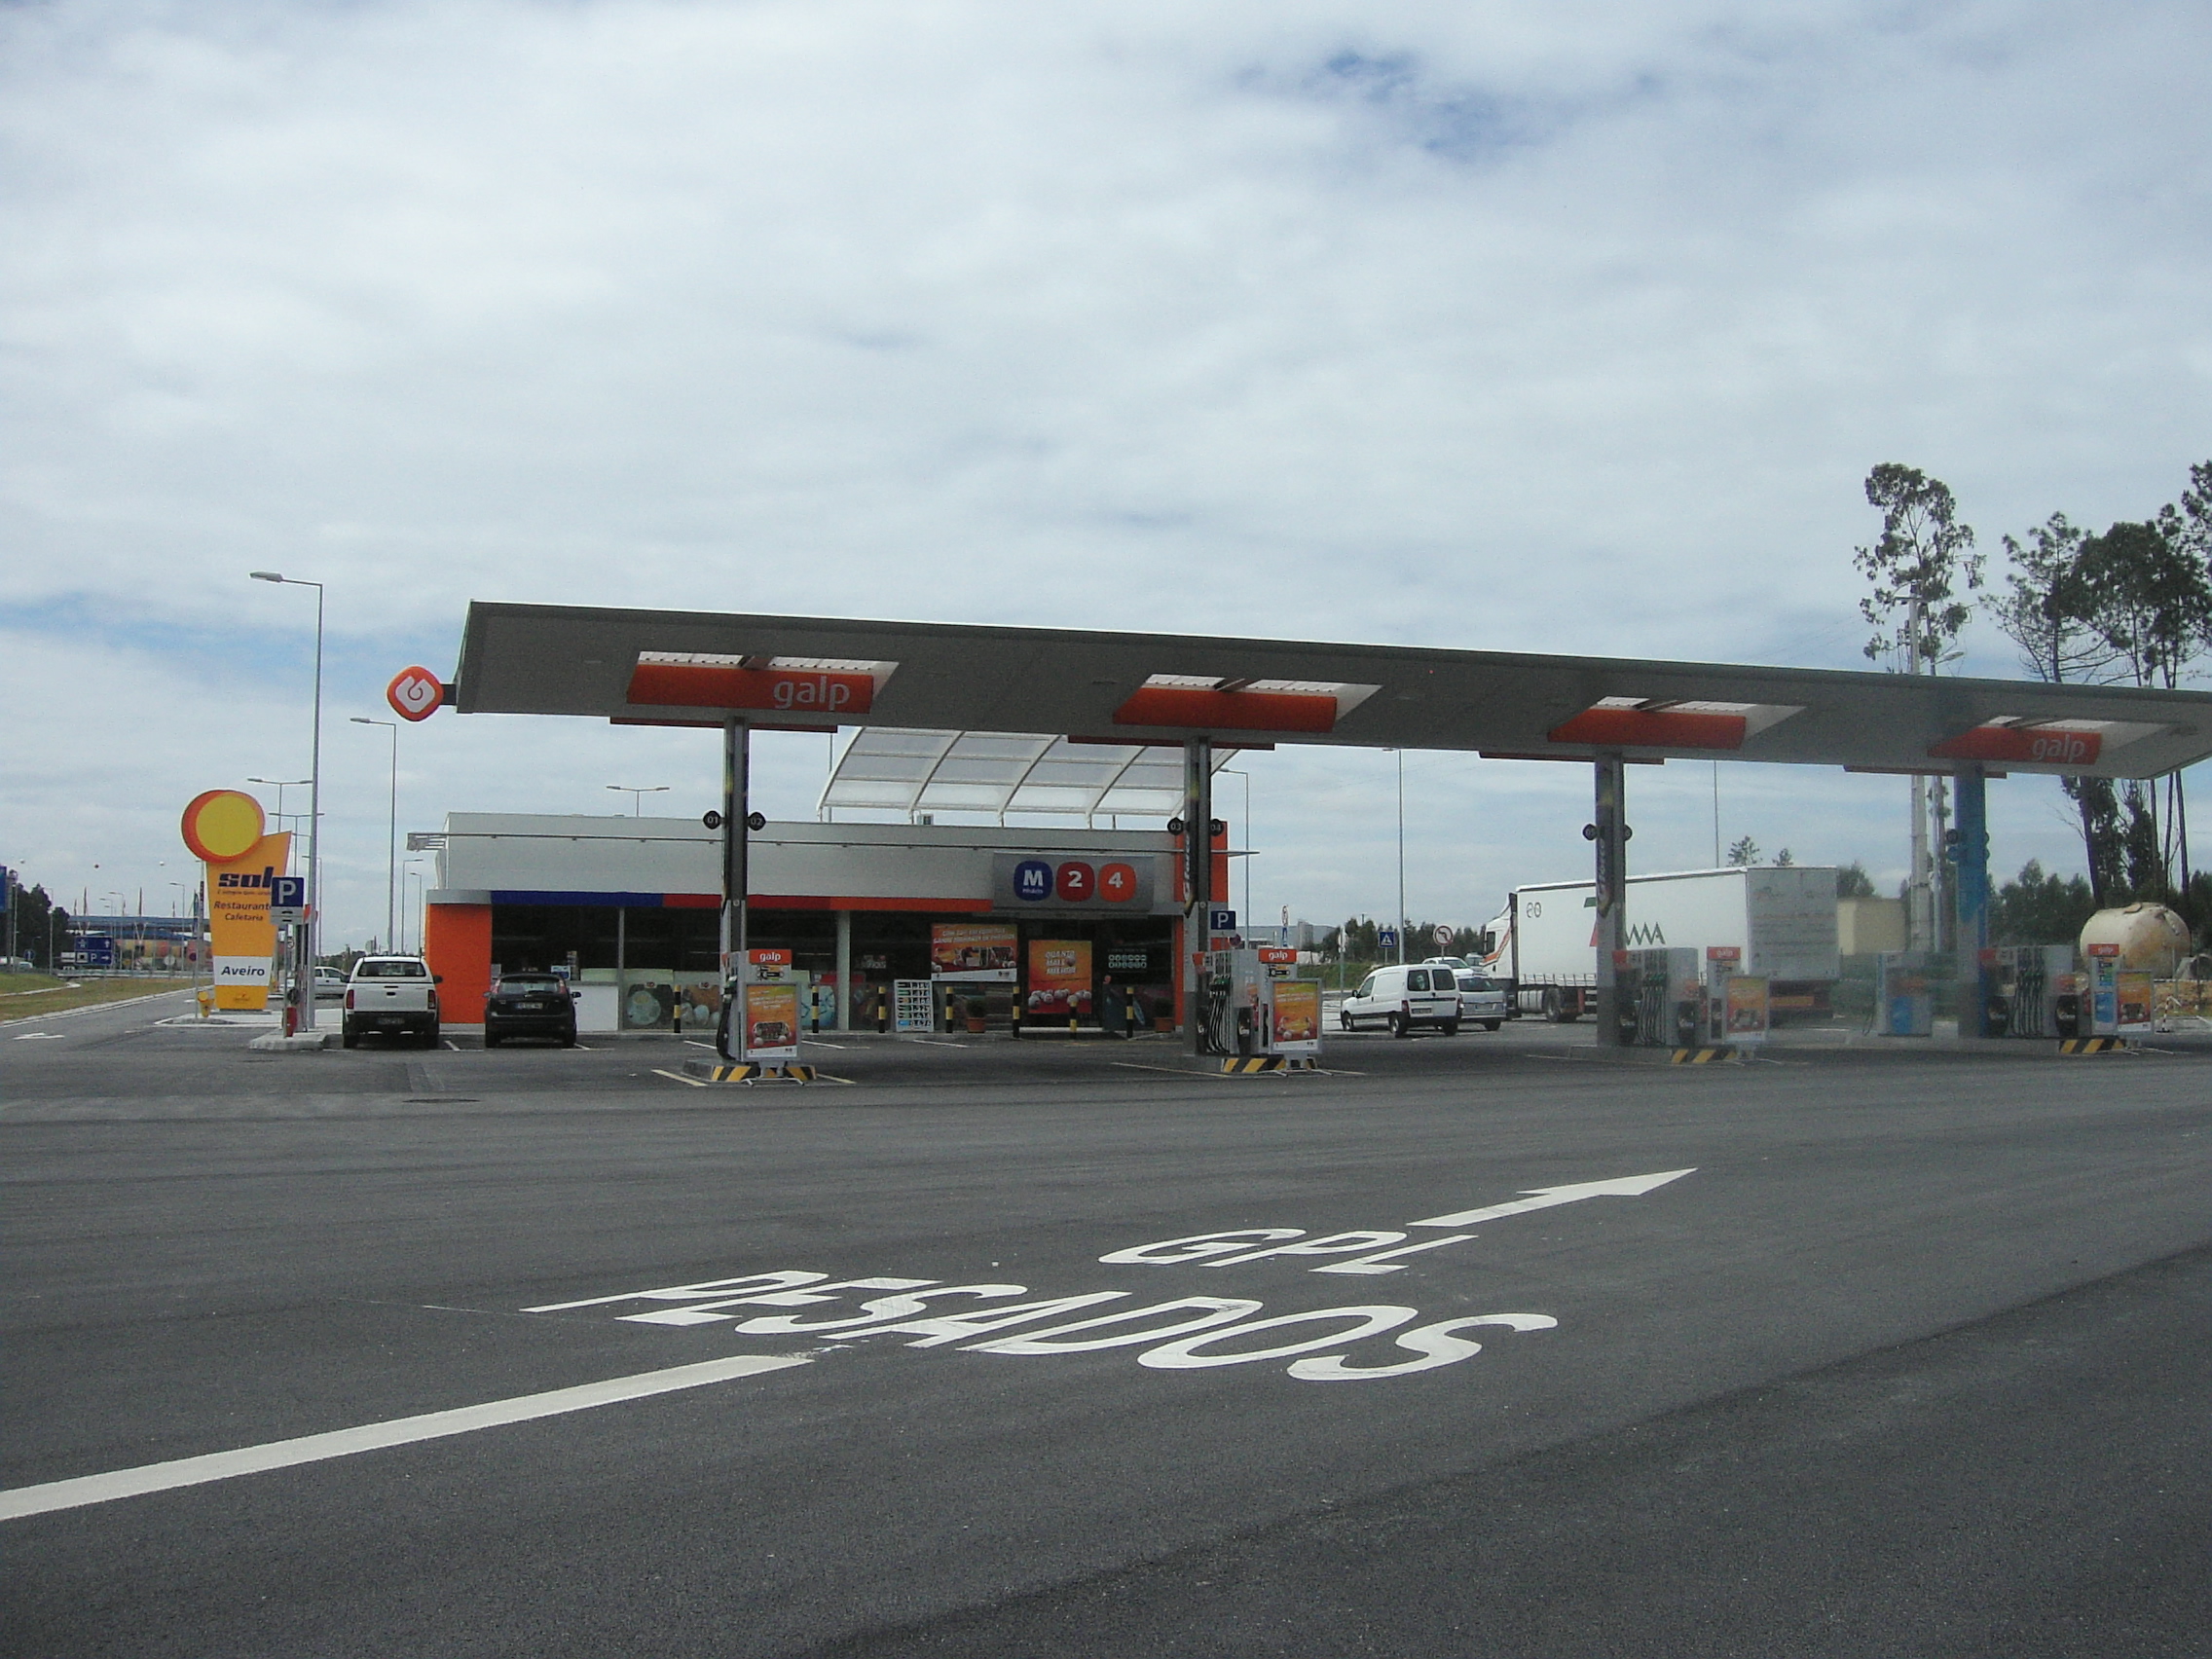 Petrol stations in Portugal: Galp